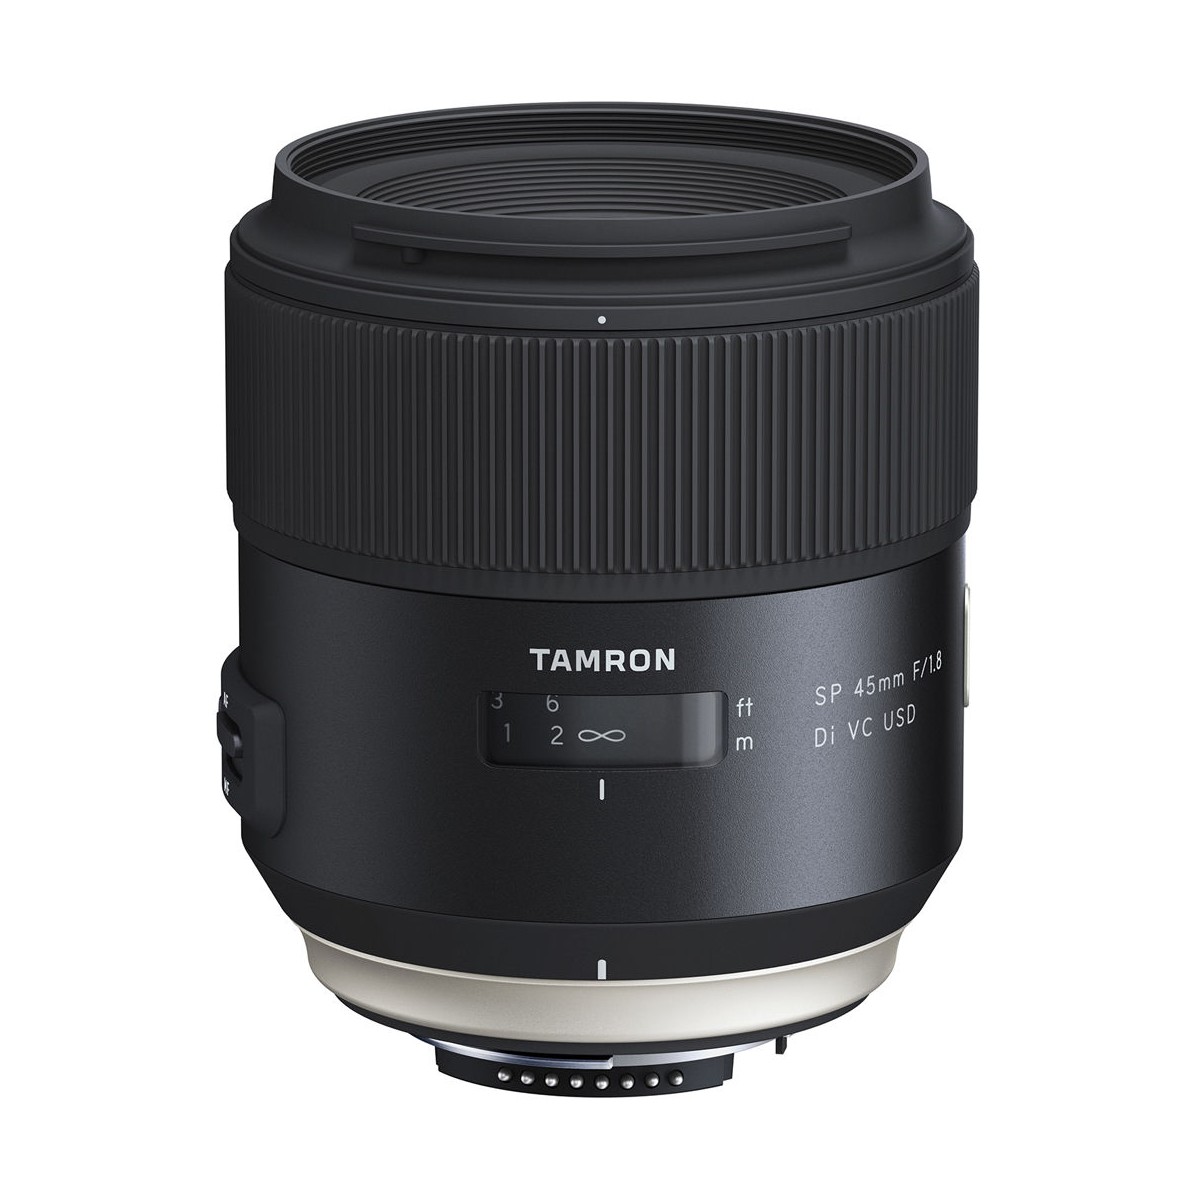 TAMRON SP 45mm F 1.8 Di VC USD ニコン用F013N - レンズ(単焦点)